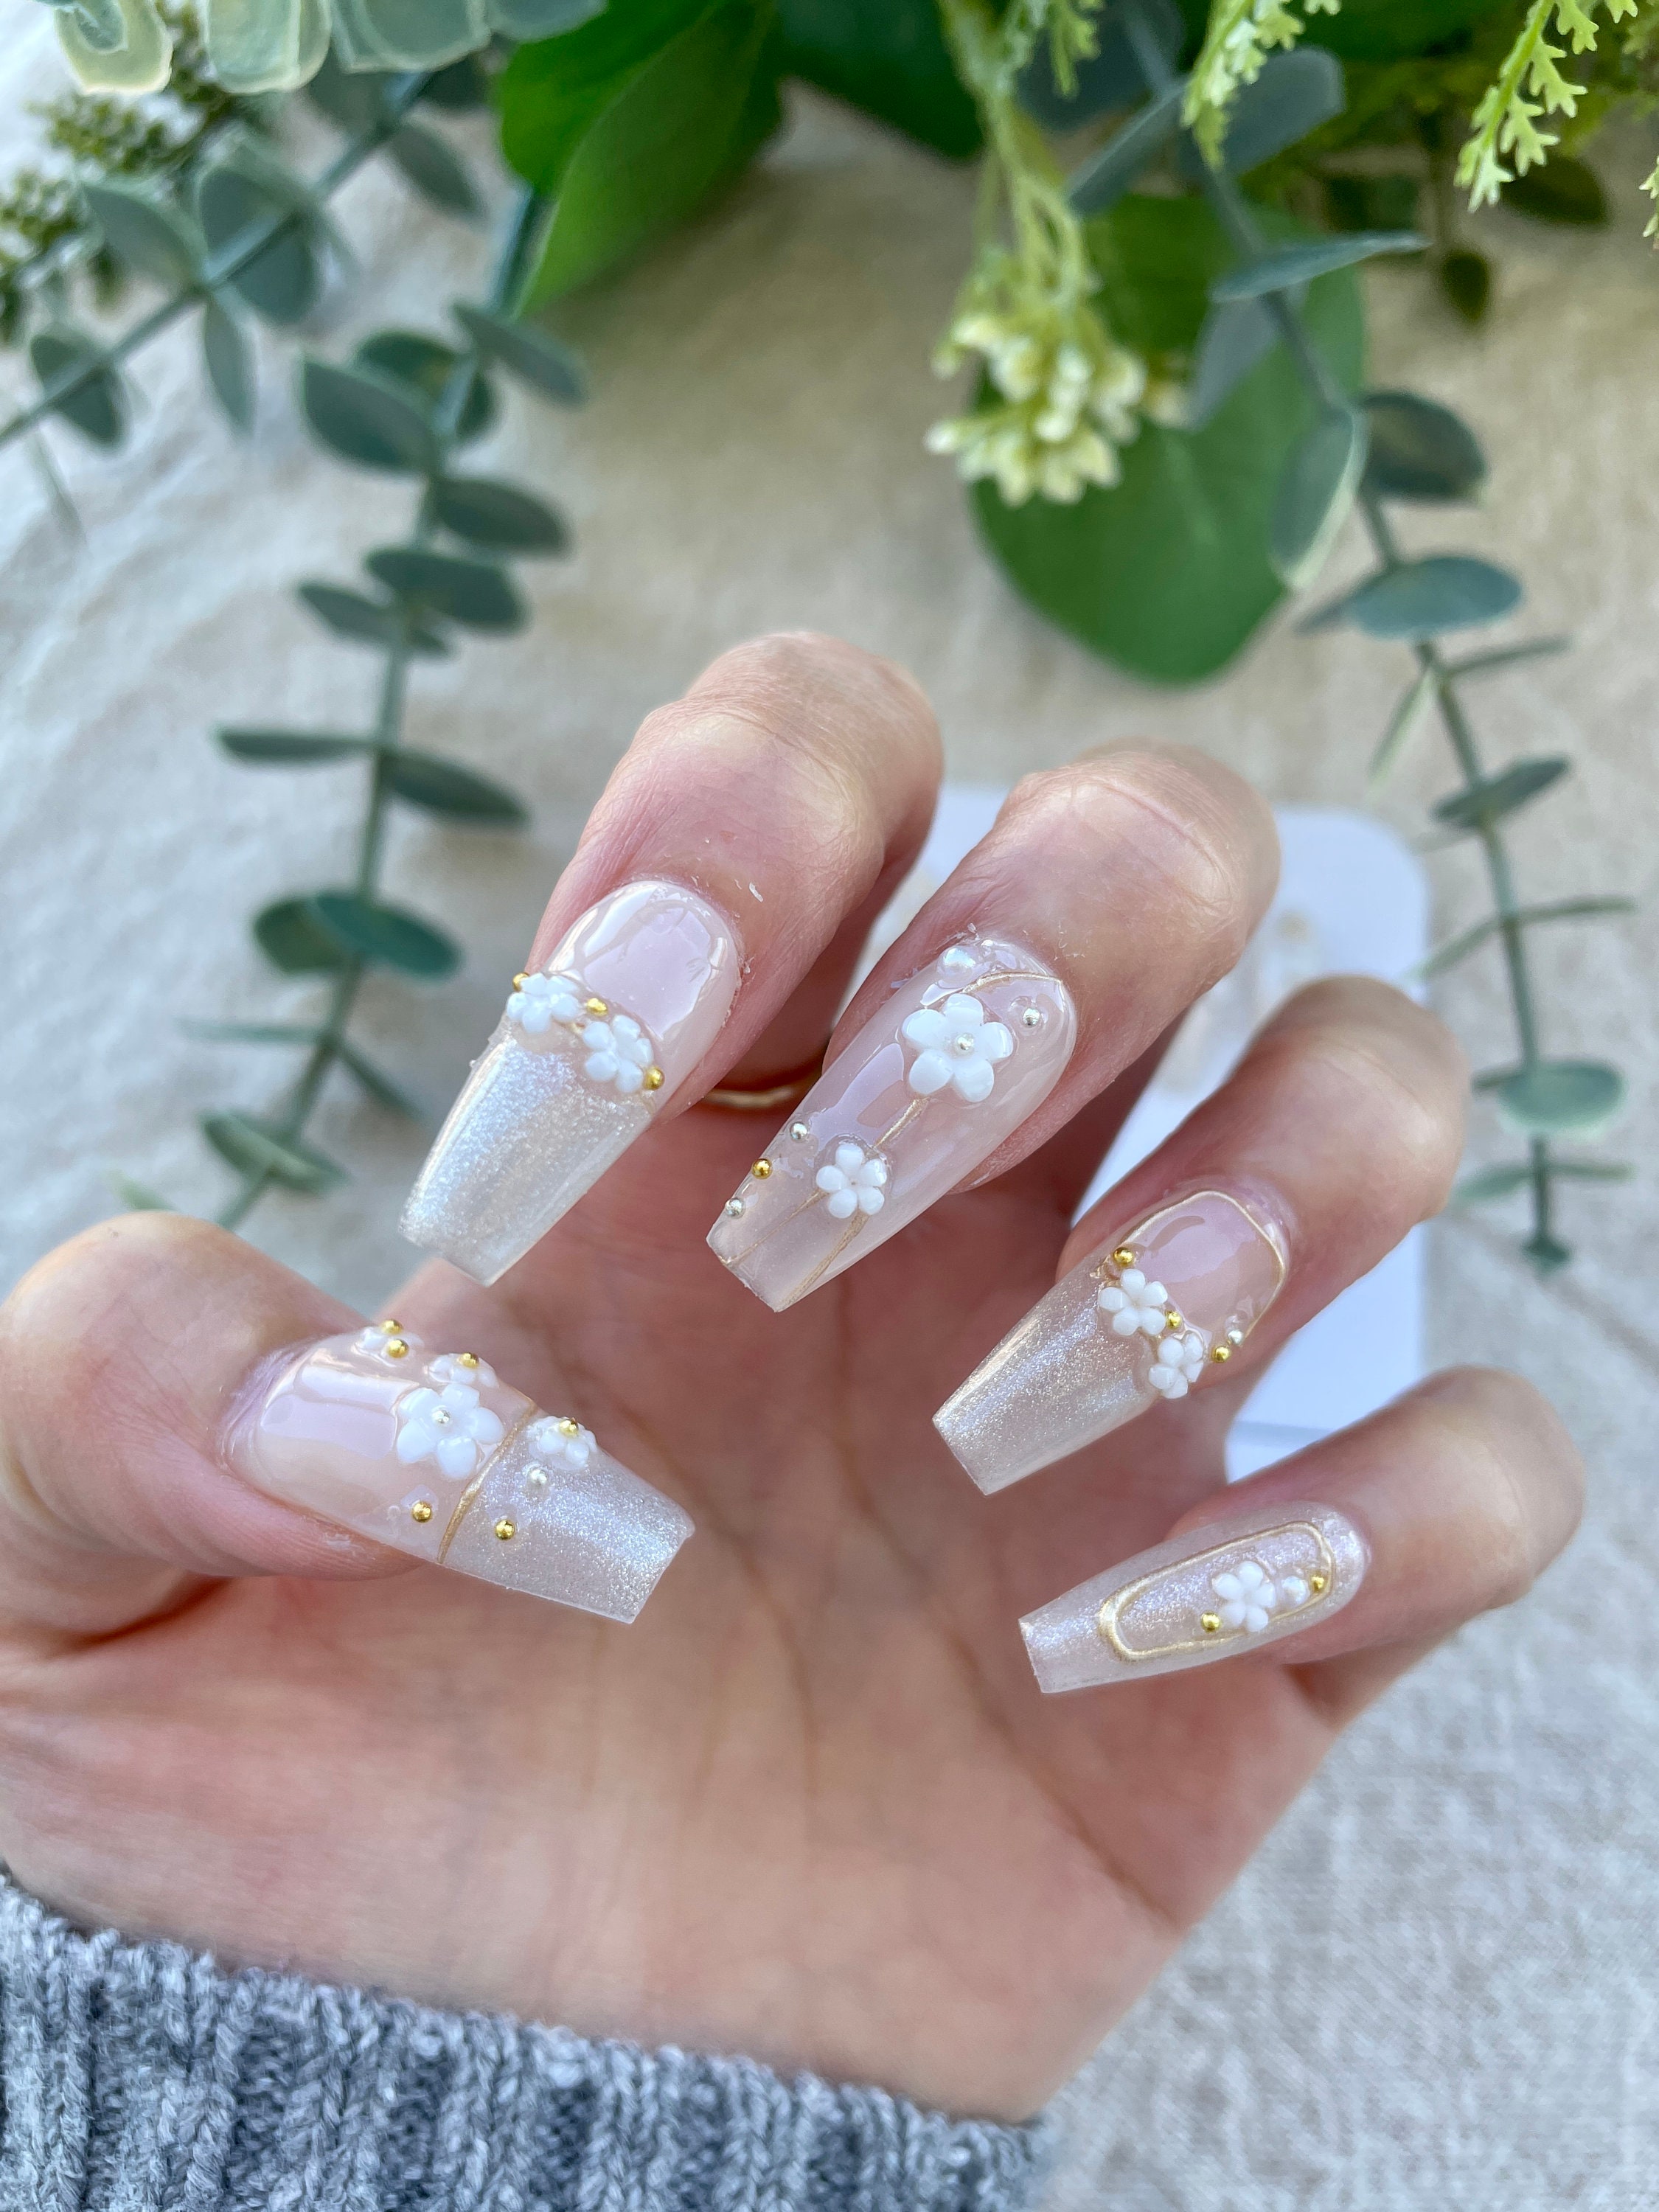 ♡ Tammy Taylor: Full Set of Pink and White Sculptured Nails - YouTube